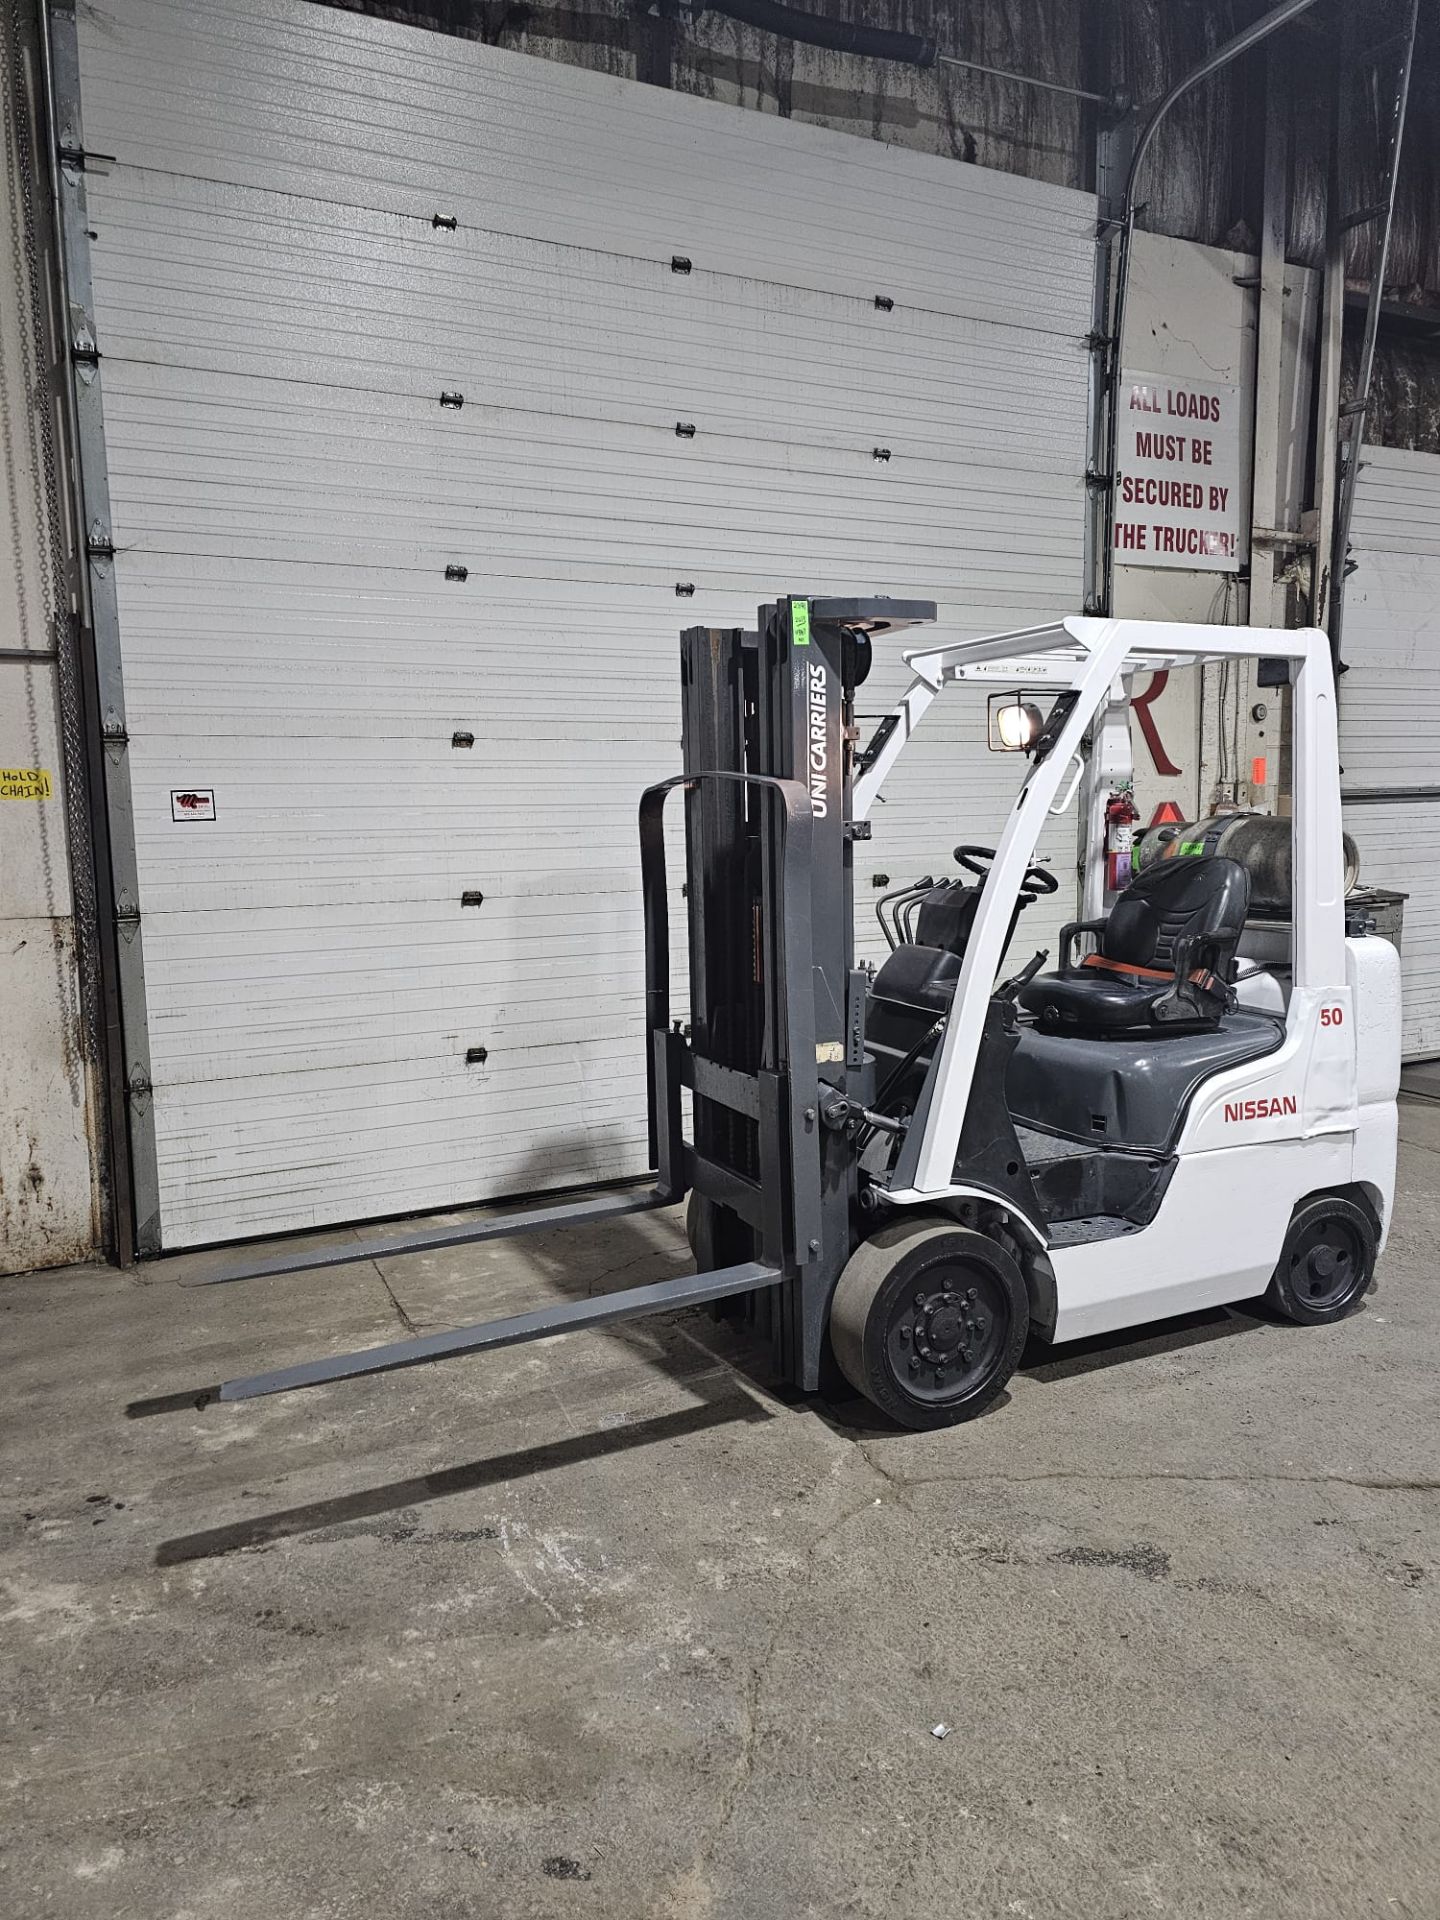 2013 Nissan 5000lbs Capacity LPG (Propane) forklift INDOOR 3-STAGE MAST with (no propane tank - Image 3 of 5